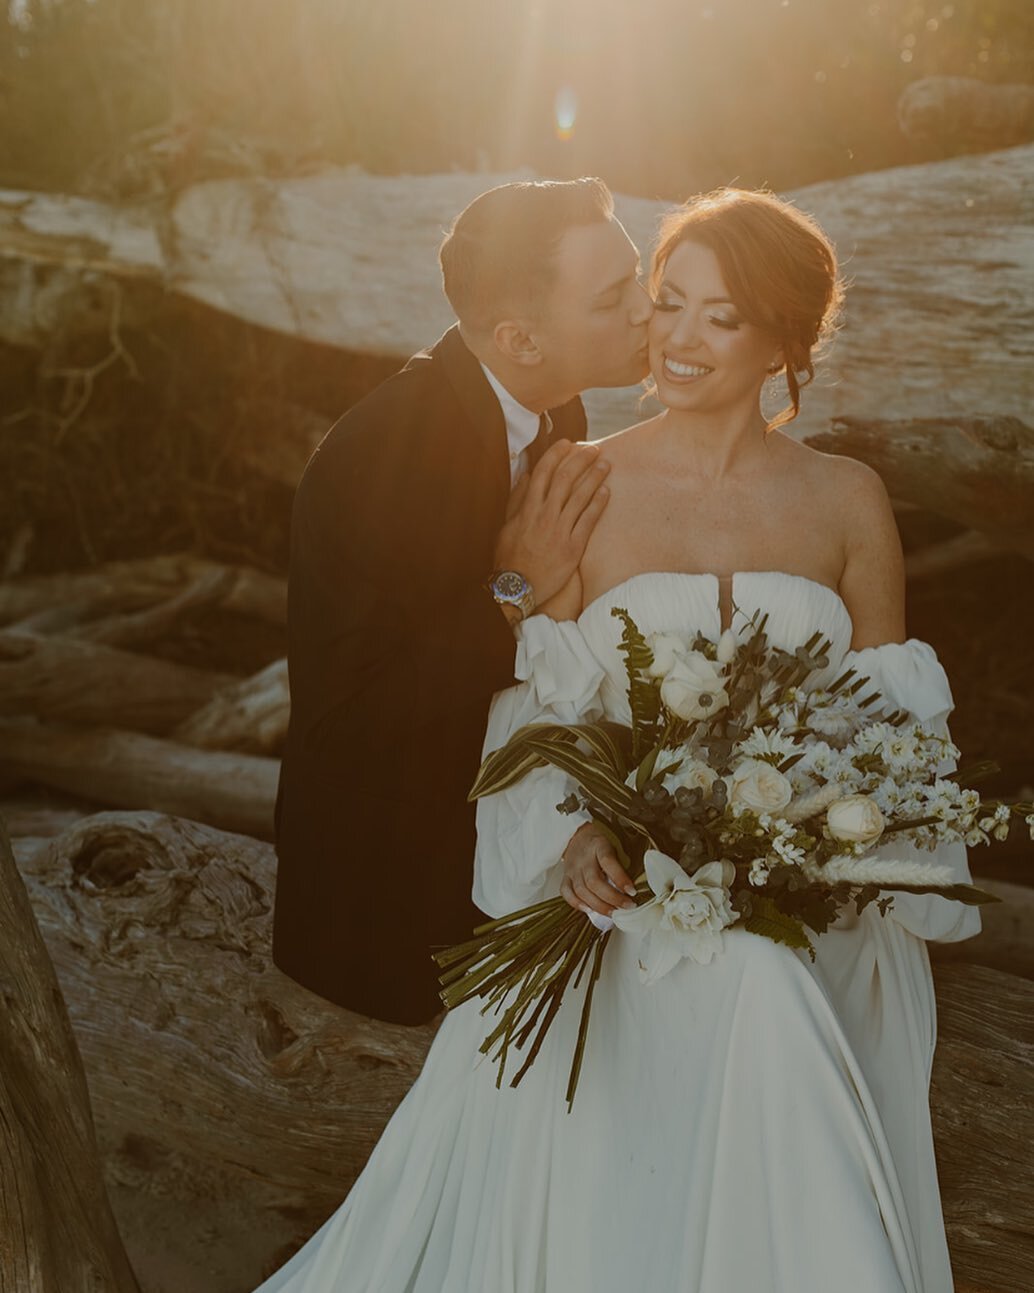 Why you should make time for creative wedding photos:

Unique and Memorable: Creative wedding photos will make your wedding stand out and be remembered for years to come.

Personalized Touch: Creative wedding photos will reflect your personality and 